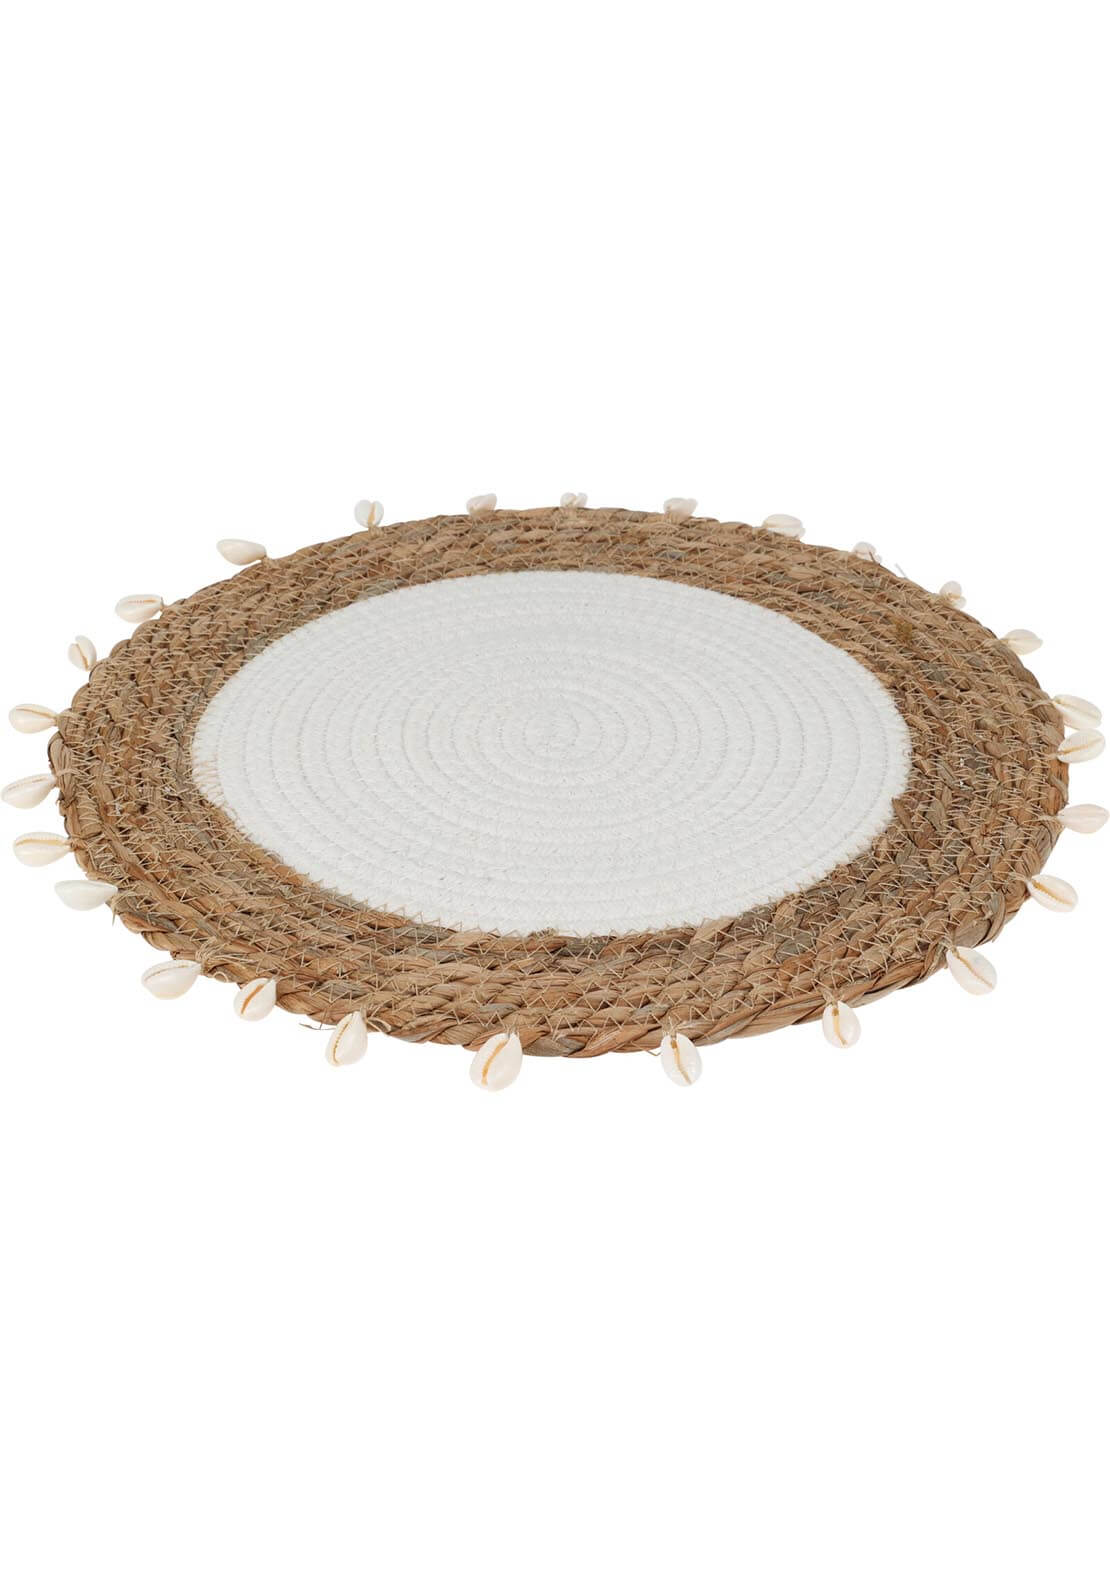 The Home Garden Seagrass Placemat 35cm 1 Shaws Department Stores